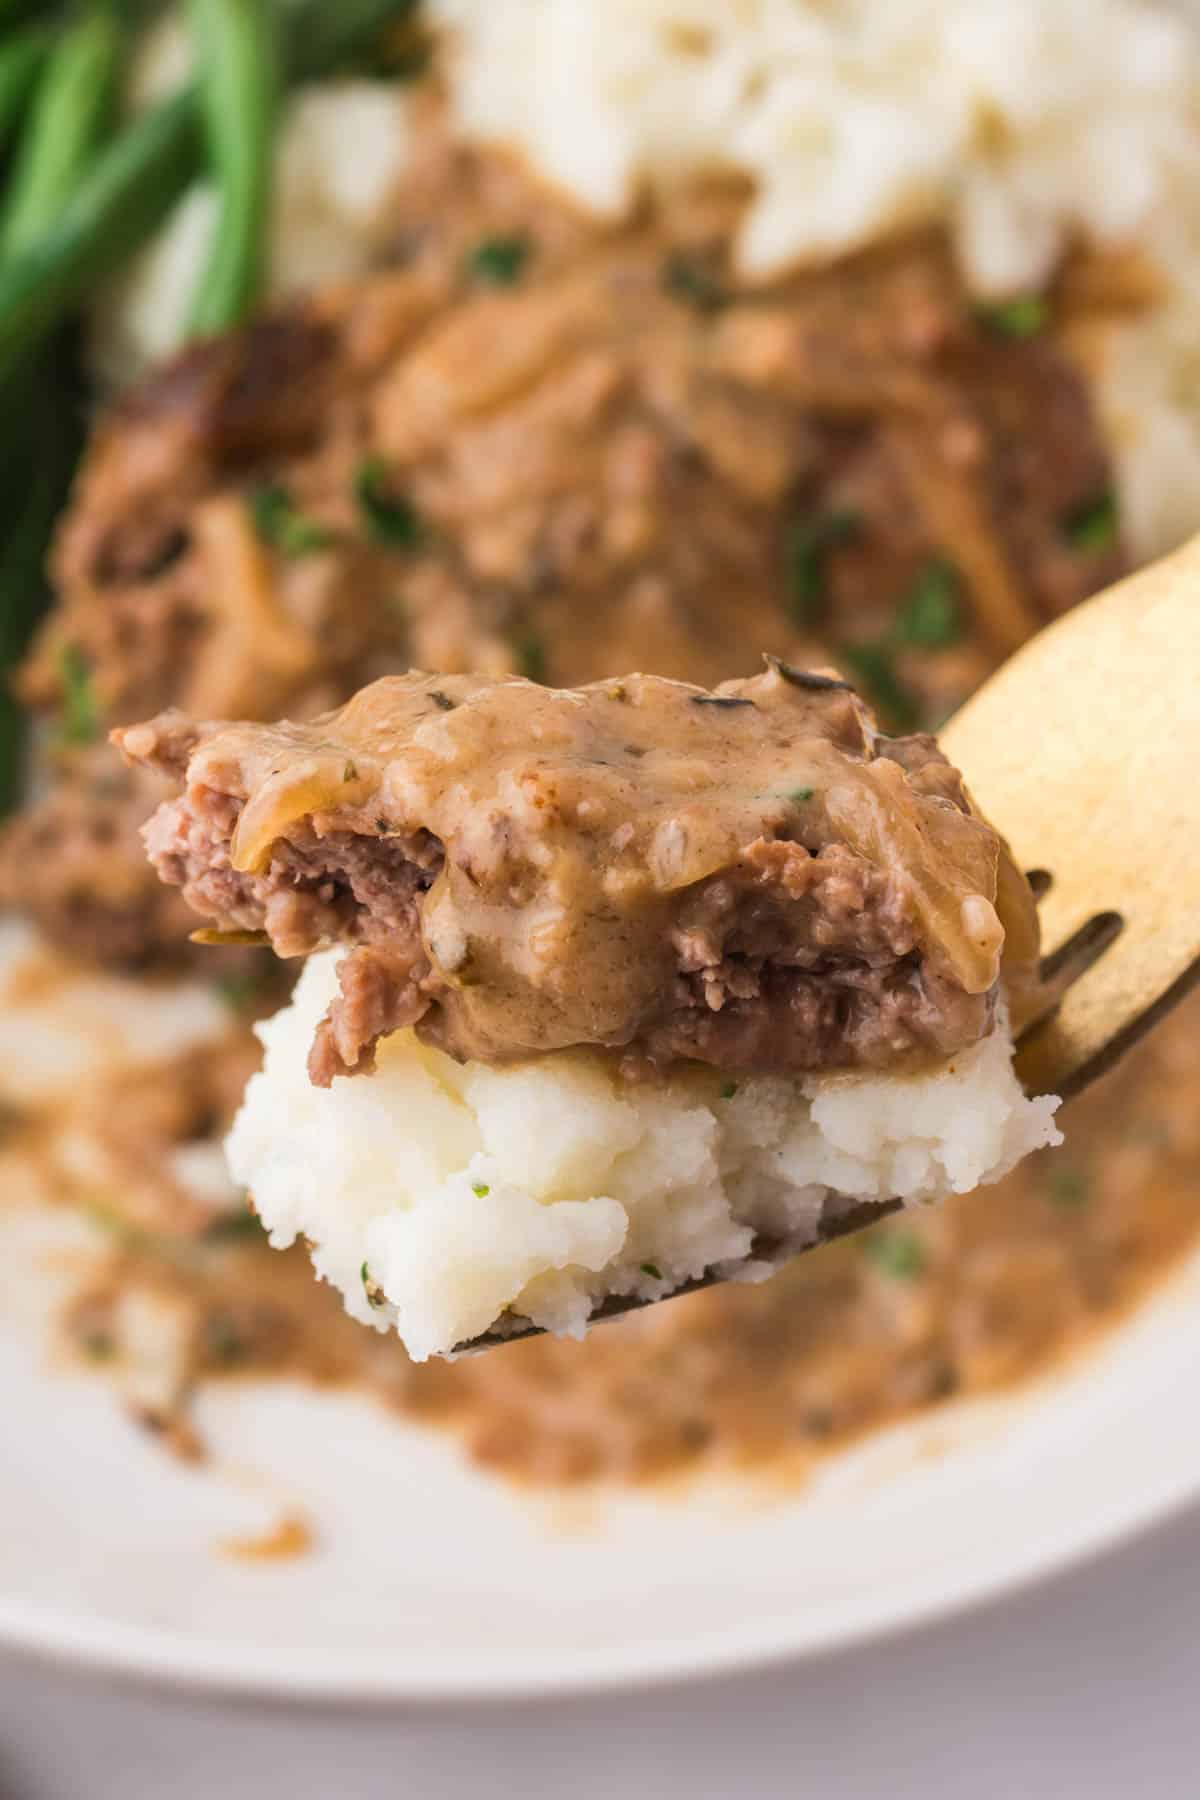 A fork holding a bite of mashed potato and slow cooker cube steak.